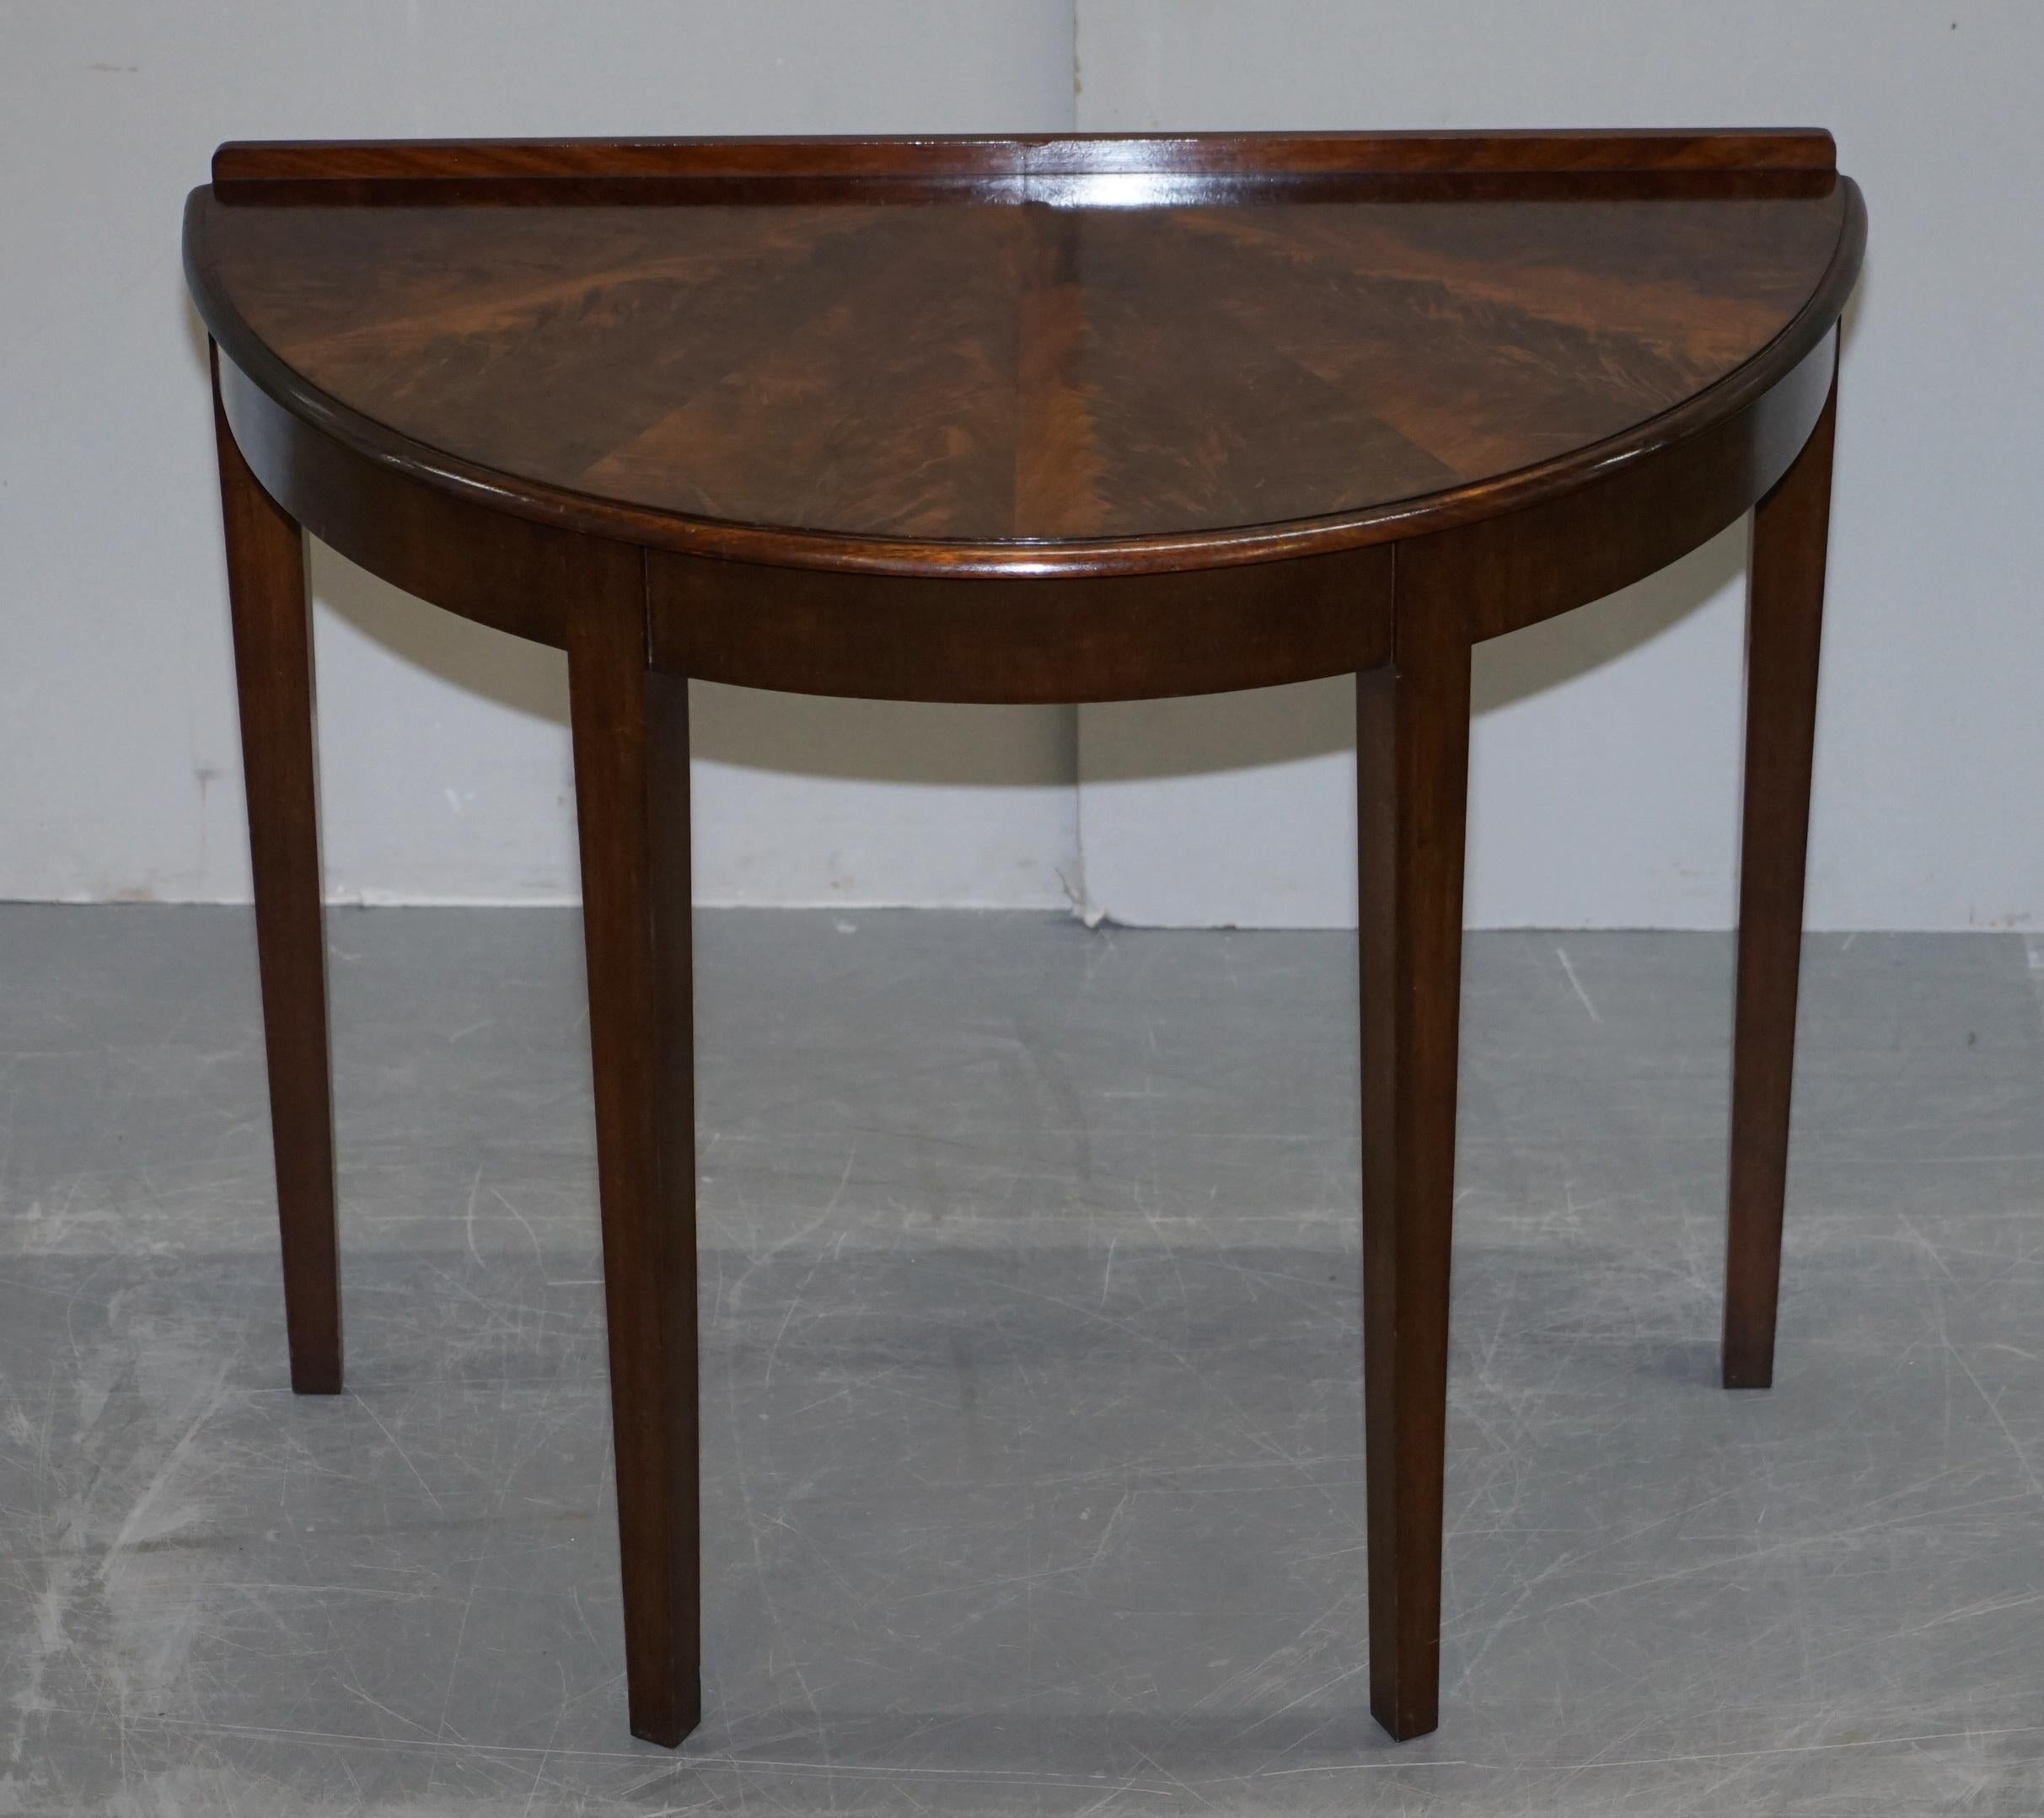 Art Deco Vintage Flamed Hardwood Demilune Console Side Table Beautiful Timber Patina